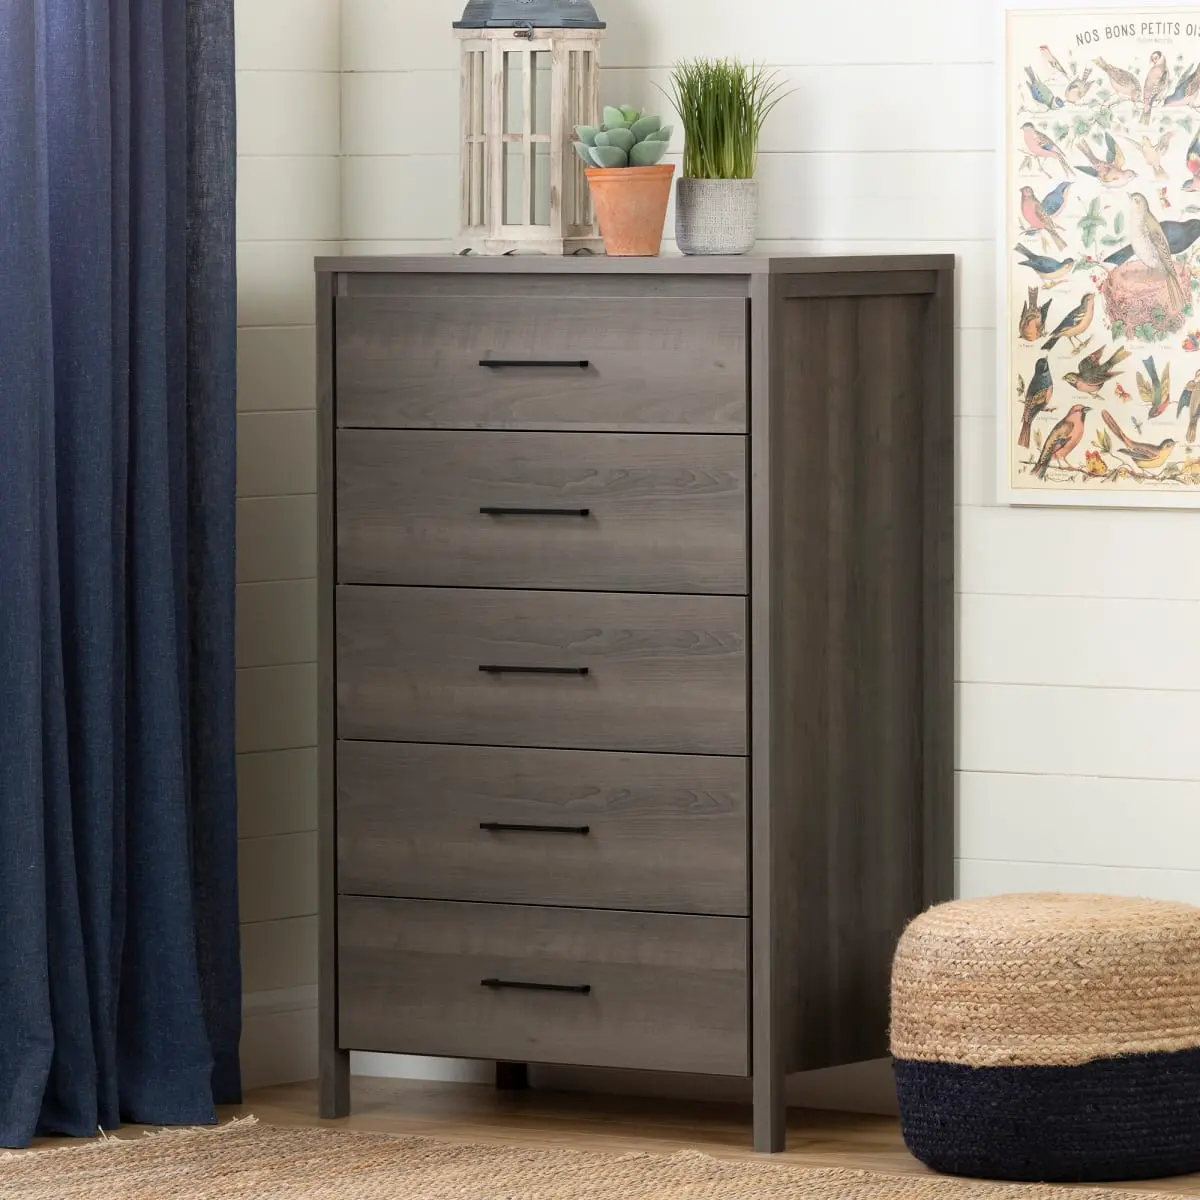 Photos - Dresser / Chests of Drawers South Shore Gravity Gray Maple 5-Drawer Chest - South Shore 9036035